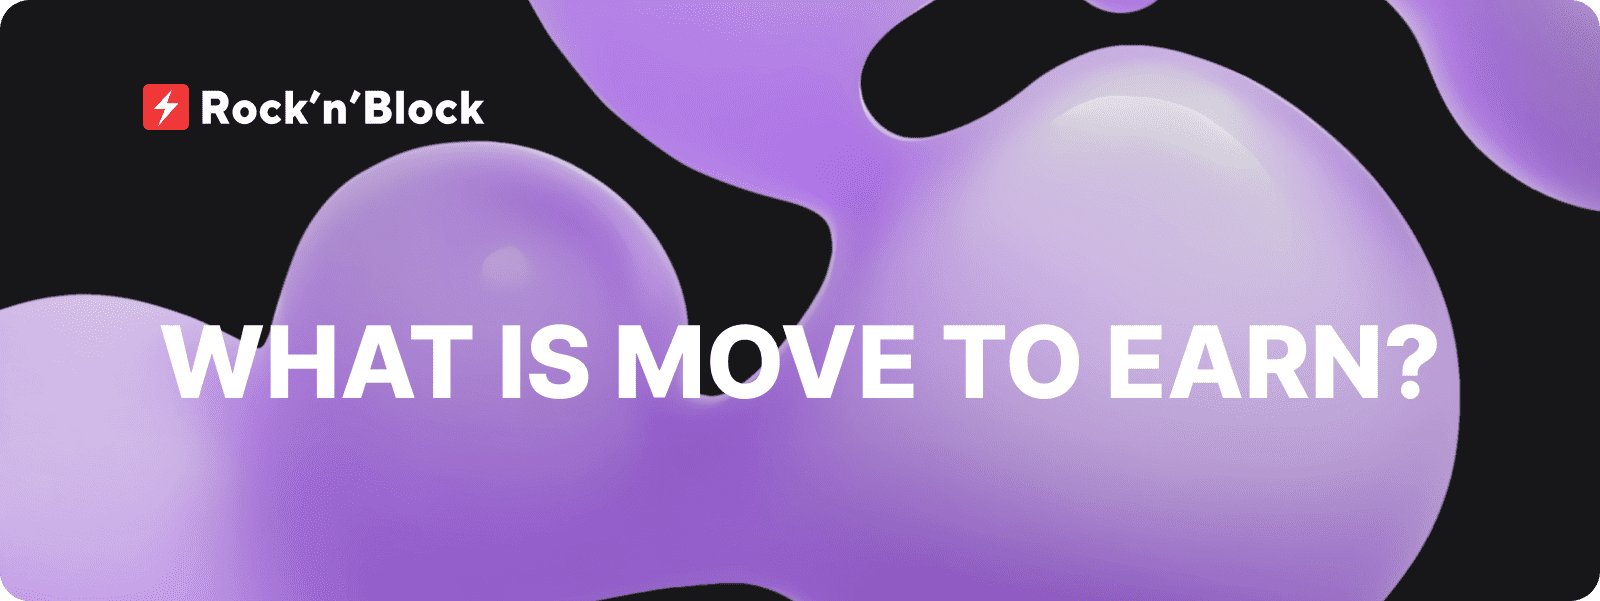 What is Move to Earn?